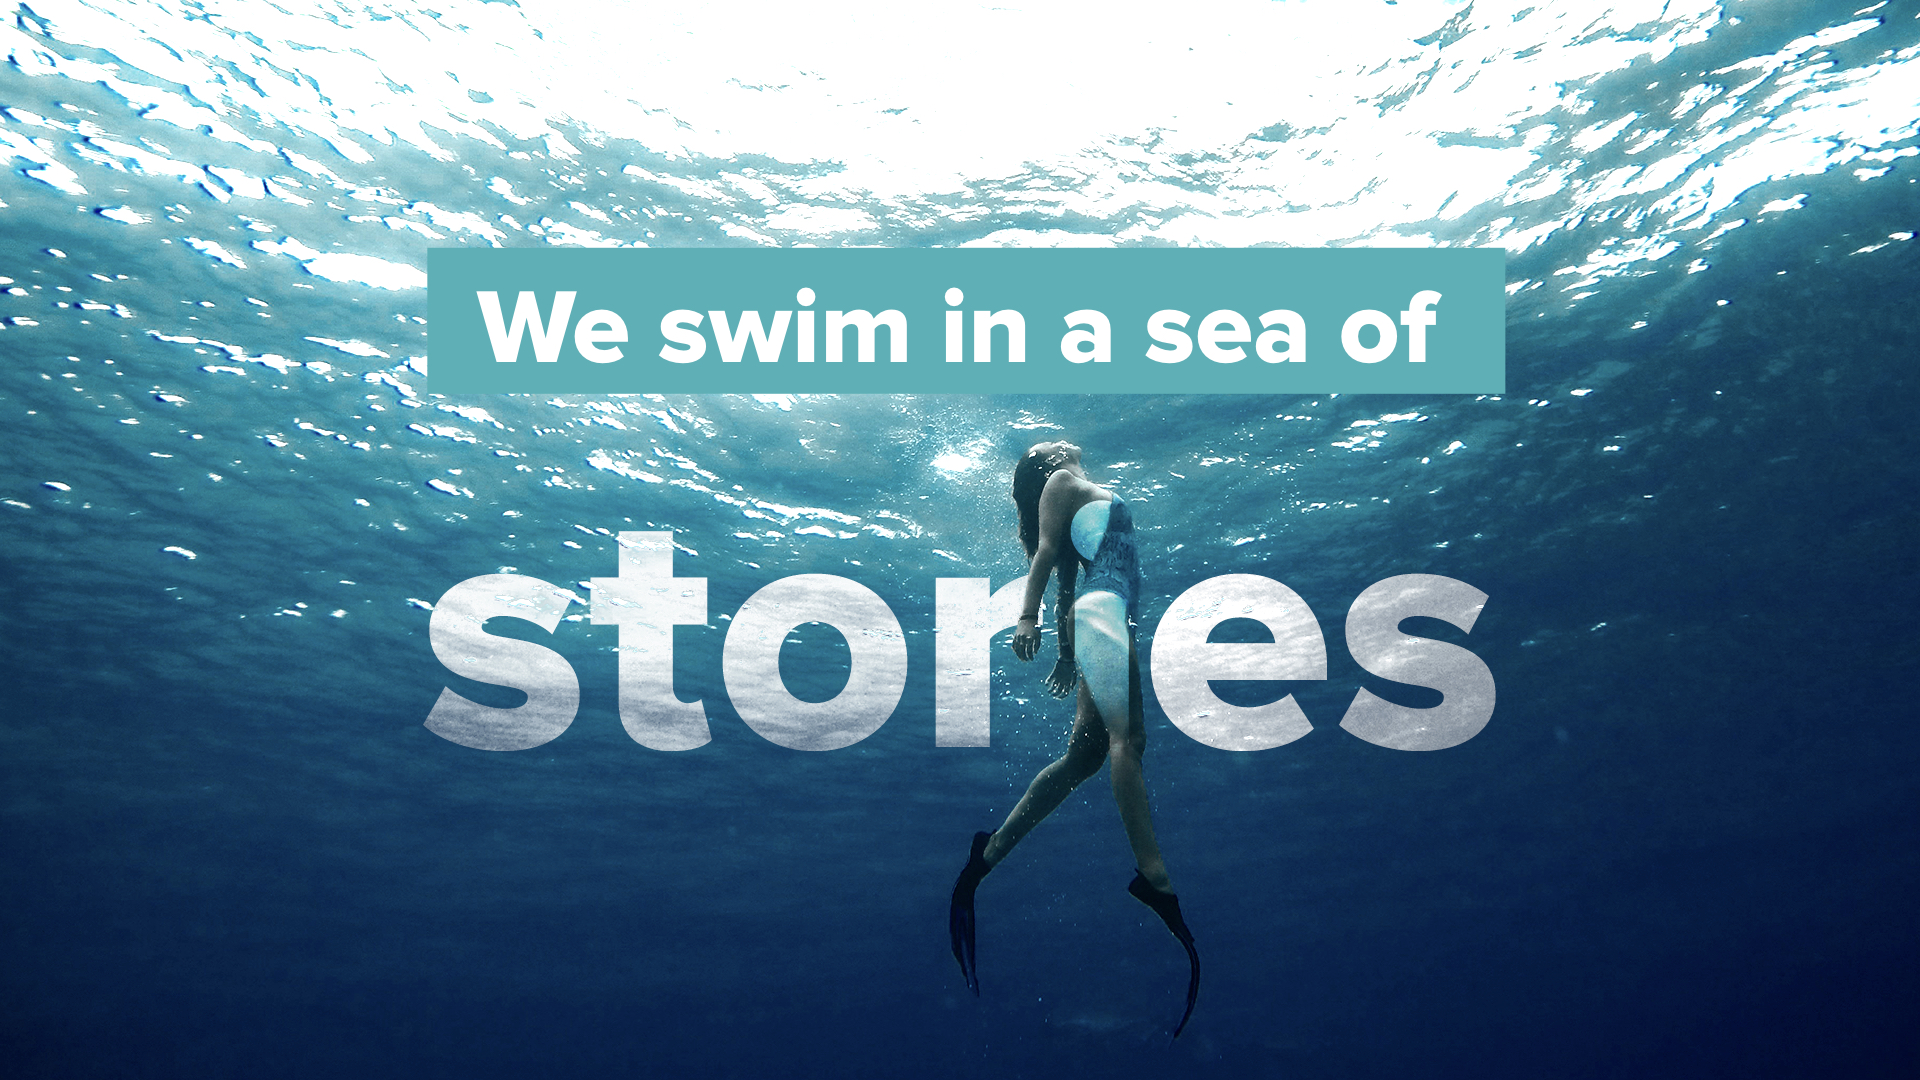 We swim in a sea of stories